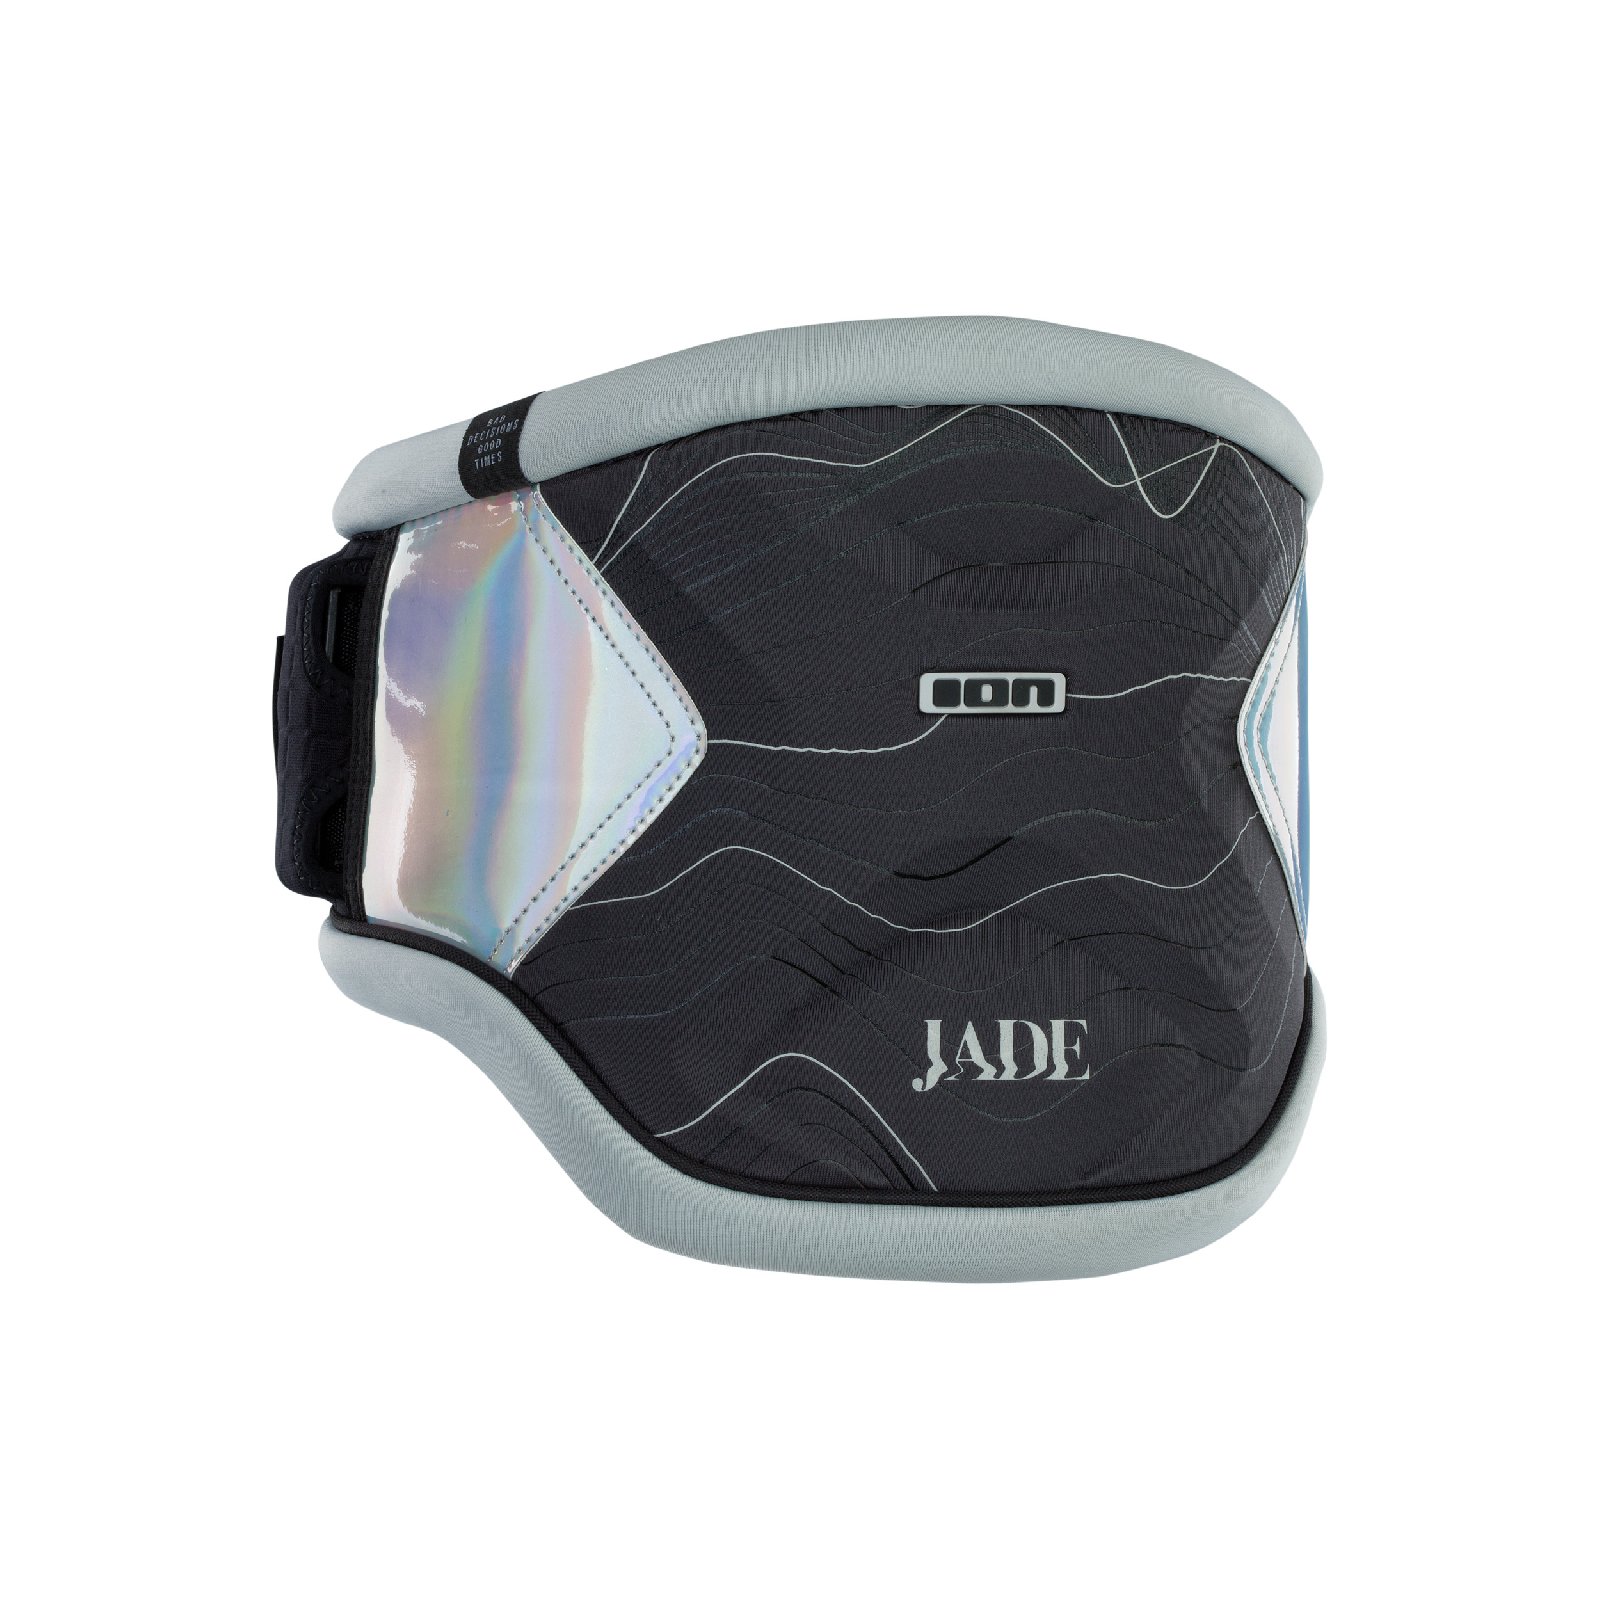 ION    JADE 6  (48213-4760) silver holographic 21-